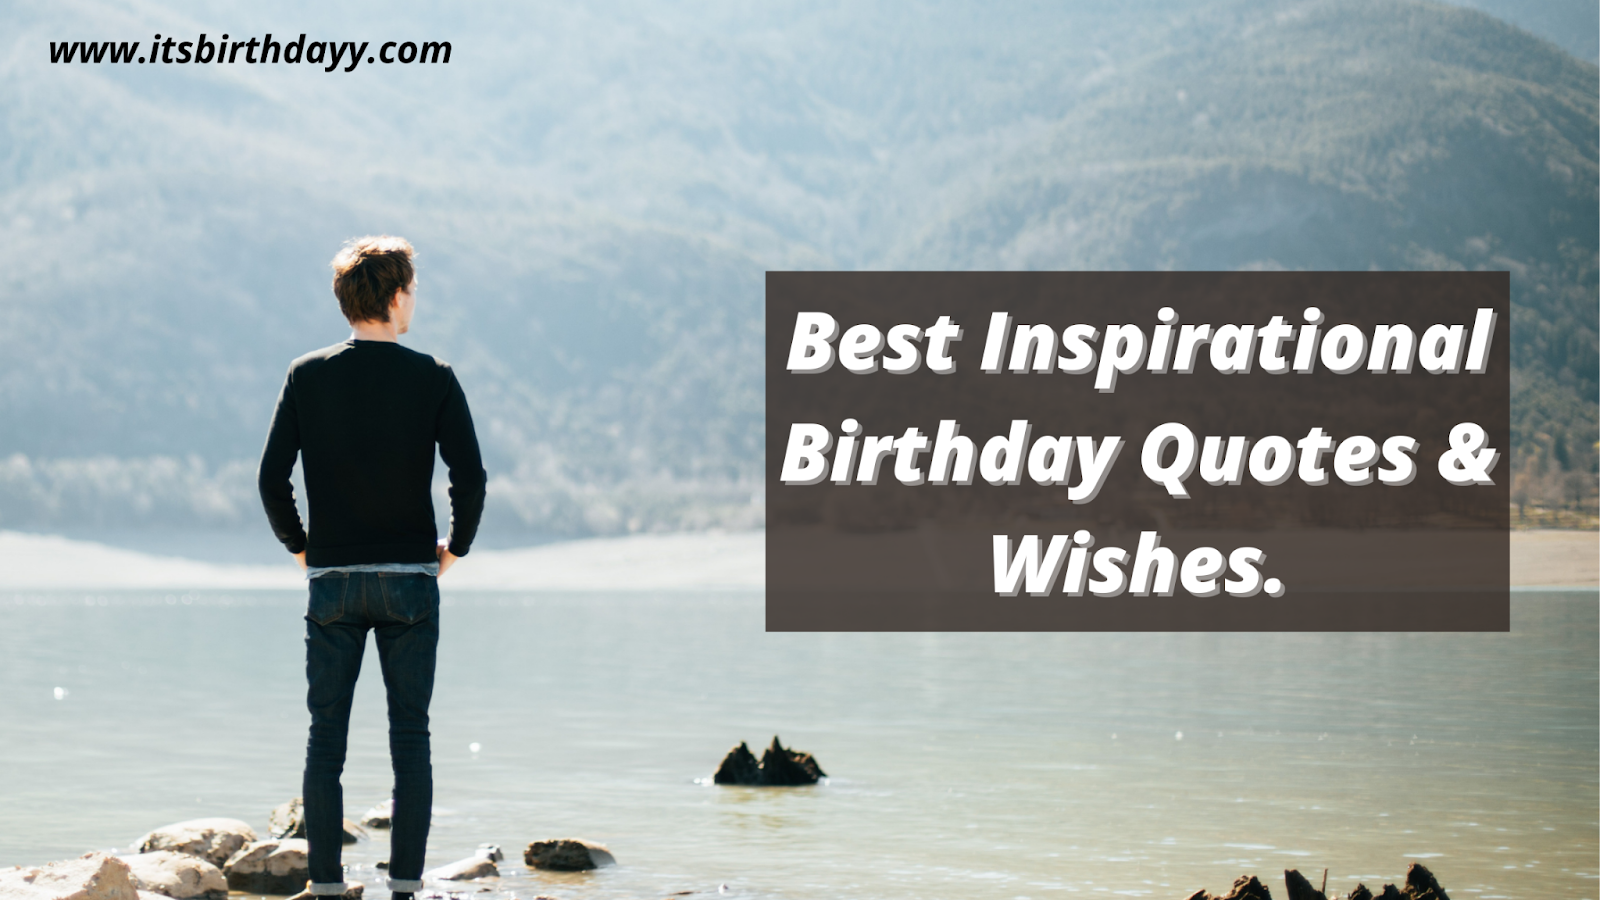 Best Inspirational Birthday Quotes & Wishes.